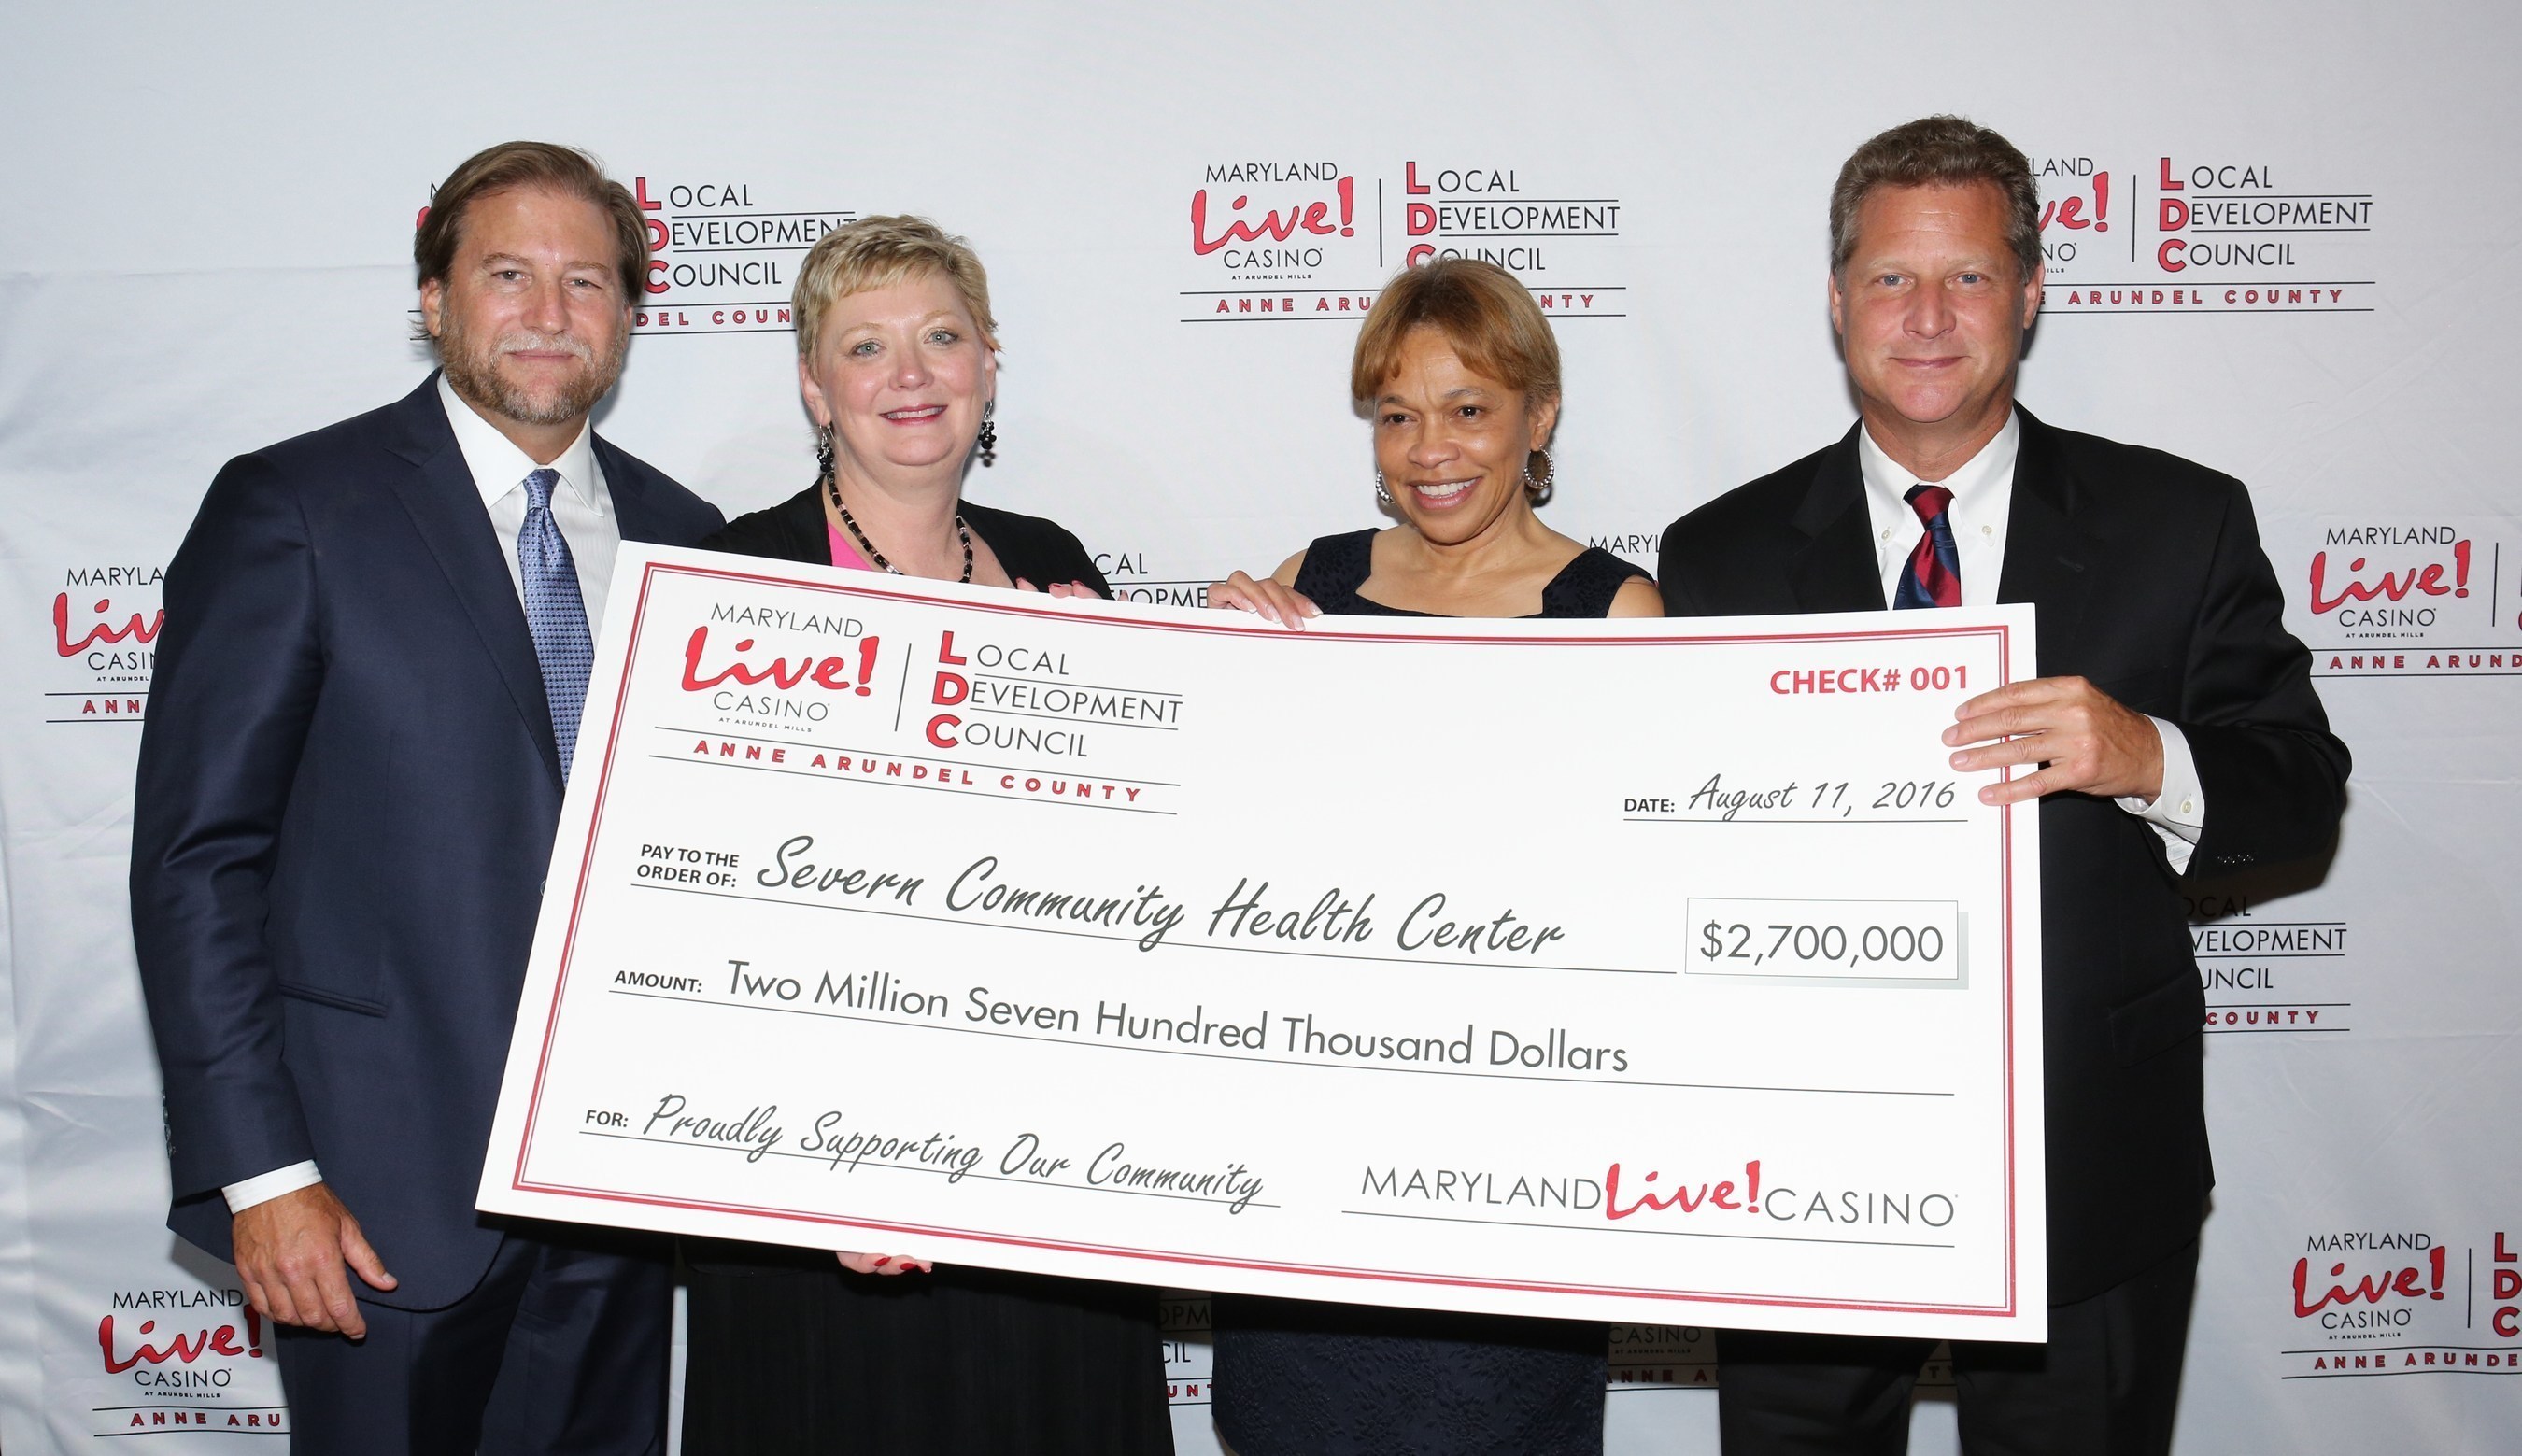 Maryland Live! Casino and Anne Arundel County today awarded more than $18.6 million in local impact grants for fiscal year 2017 to various grant recipients as recommended by the Local Development Council (LDC), which helps to manage the allocation of county gaming tax revenue to local organizations. Joe Weinberg, Managing Partner of The Cordish Companies (far left); Anne Arundel County Executive Steve Schuh (far right); and Claire Louder, Chair of the LDC, (2nd from left) officially presented the grants, including one for $2.7 million to Severn Community Center Executive Director Faye Royale-Larkins. (2nd from right).